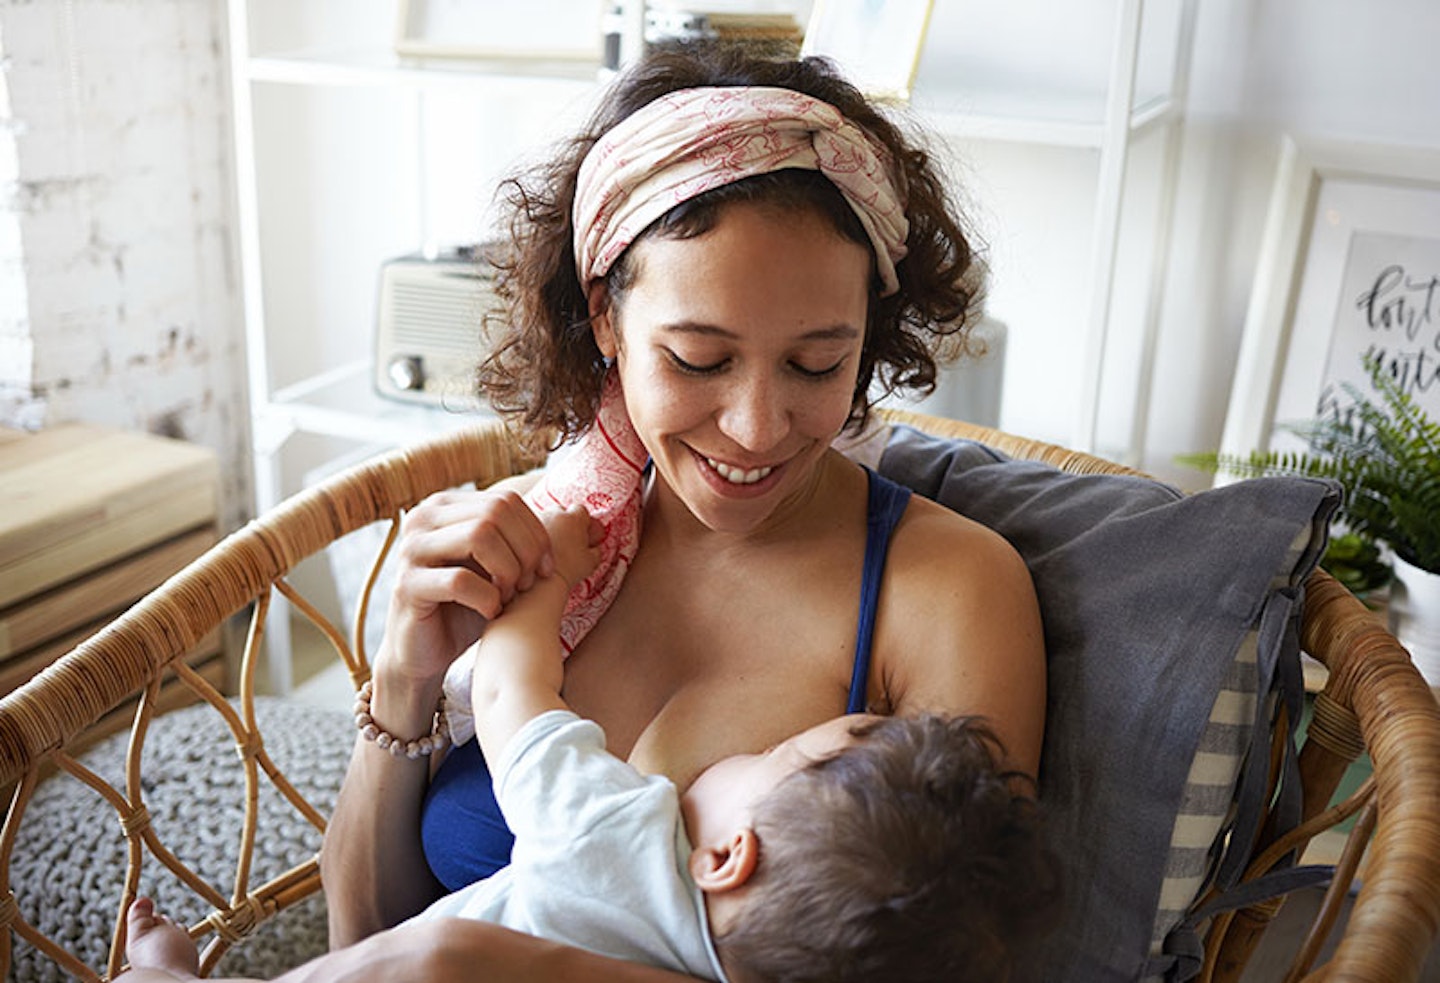 Breastfeeding can burn up to 500 calories a day